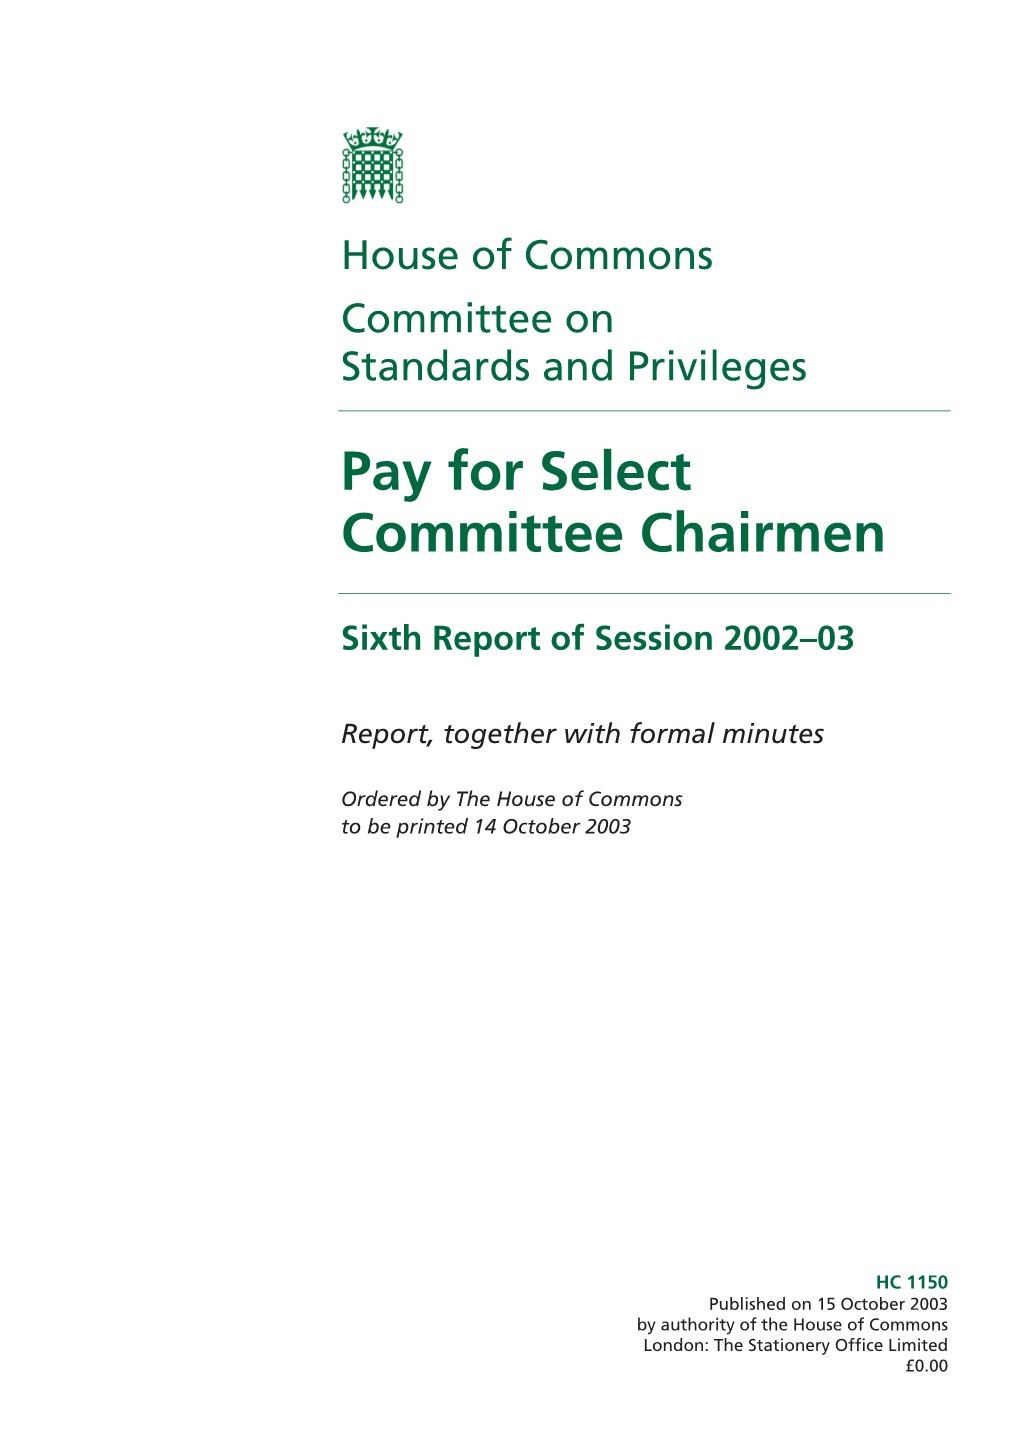 Pay for Select Committee Chairmen